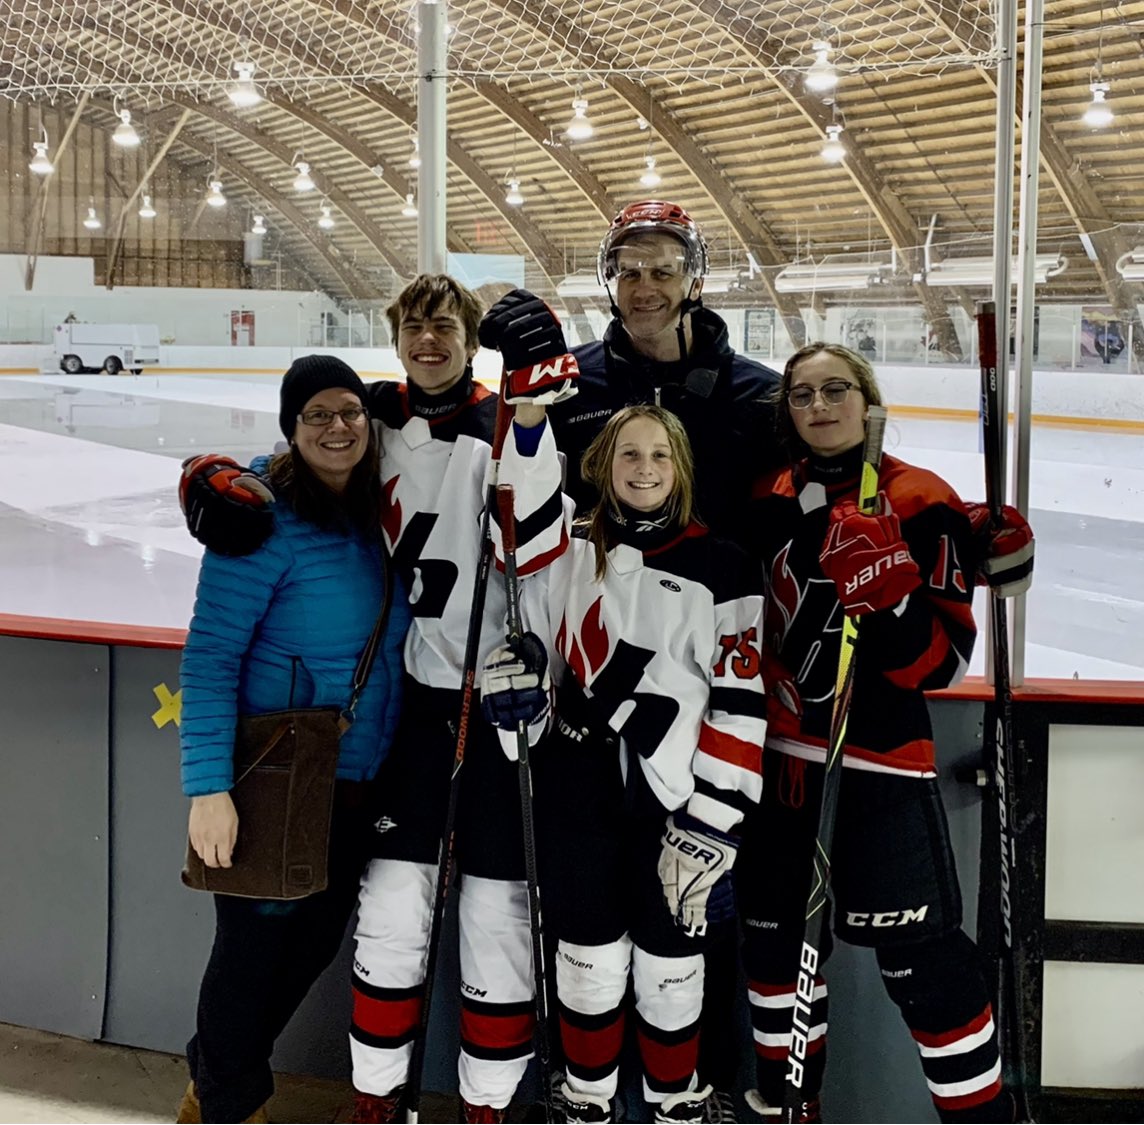 I am a 43 year old blue collar worker. Father of 3 angels (our boy is #autistic) and married for over 20 years. I coach female 🥎 and 🏒 My wife is a nurse. According to @JustinTrudeau we are misogynistic, racist and our family should not be tolerated in society. #TrudeauMustGo